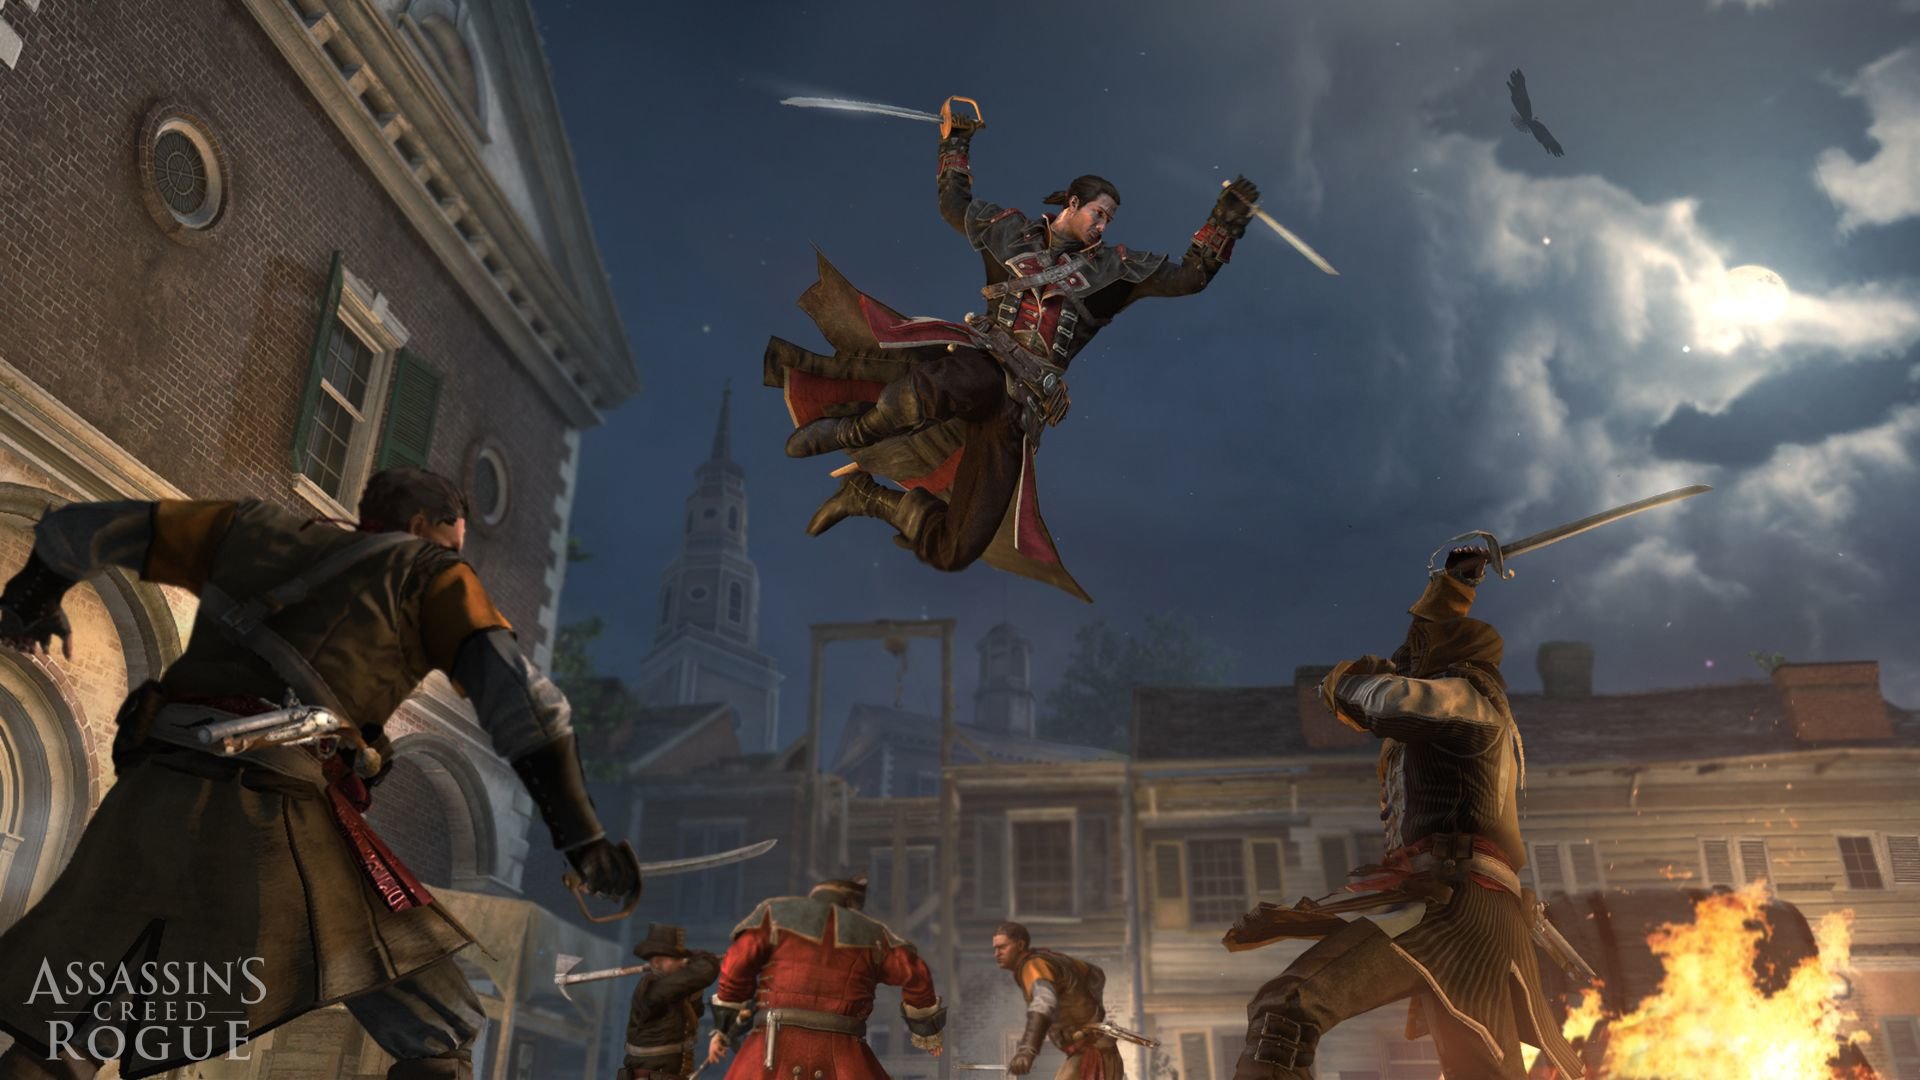 Awesome Assassin's Creed: Rogue free wallpaper ID:231508 for full hd computer